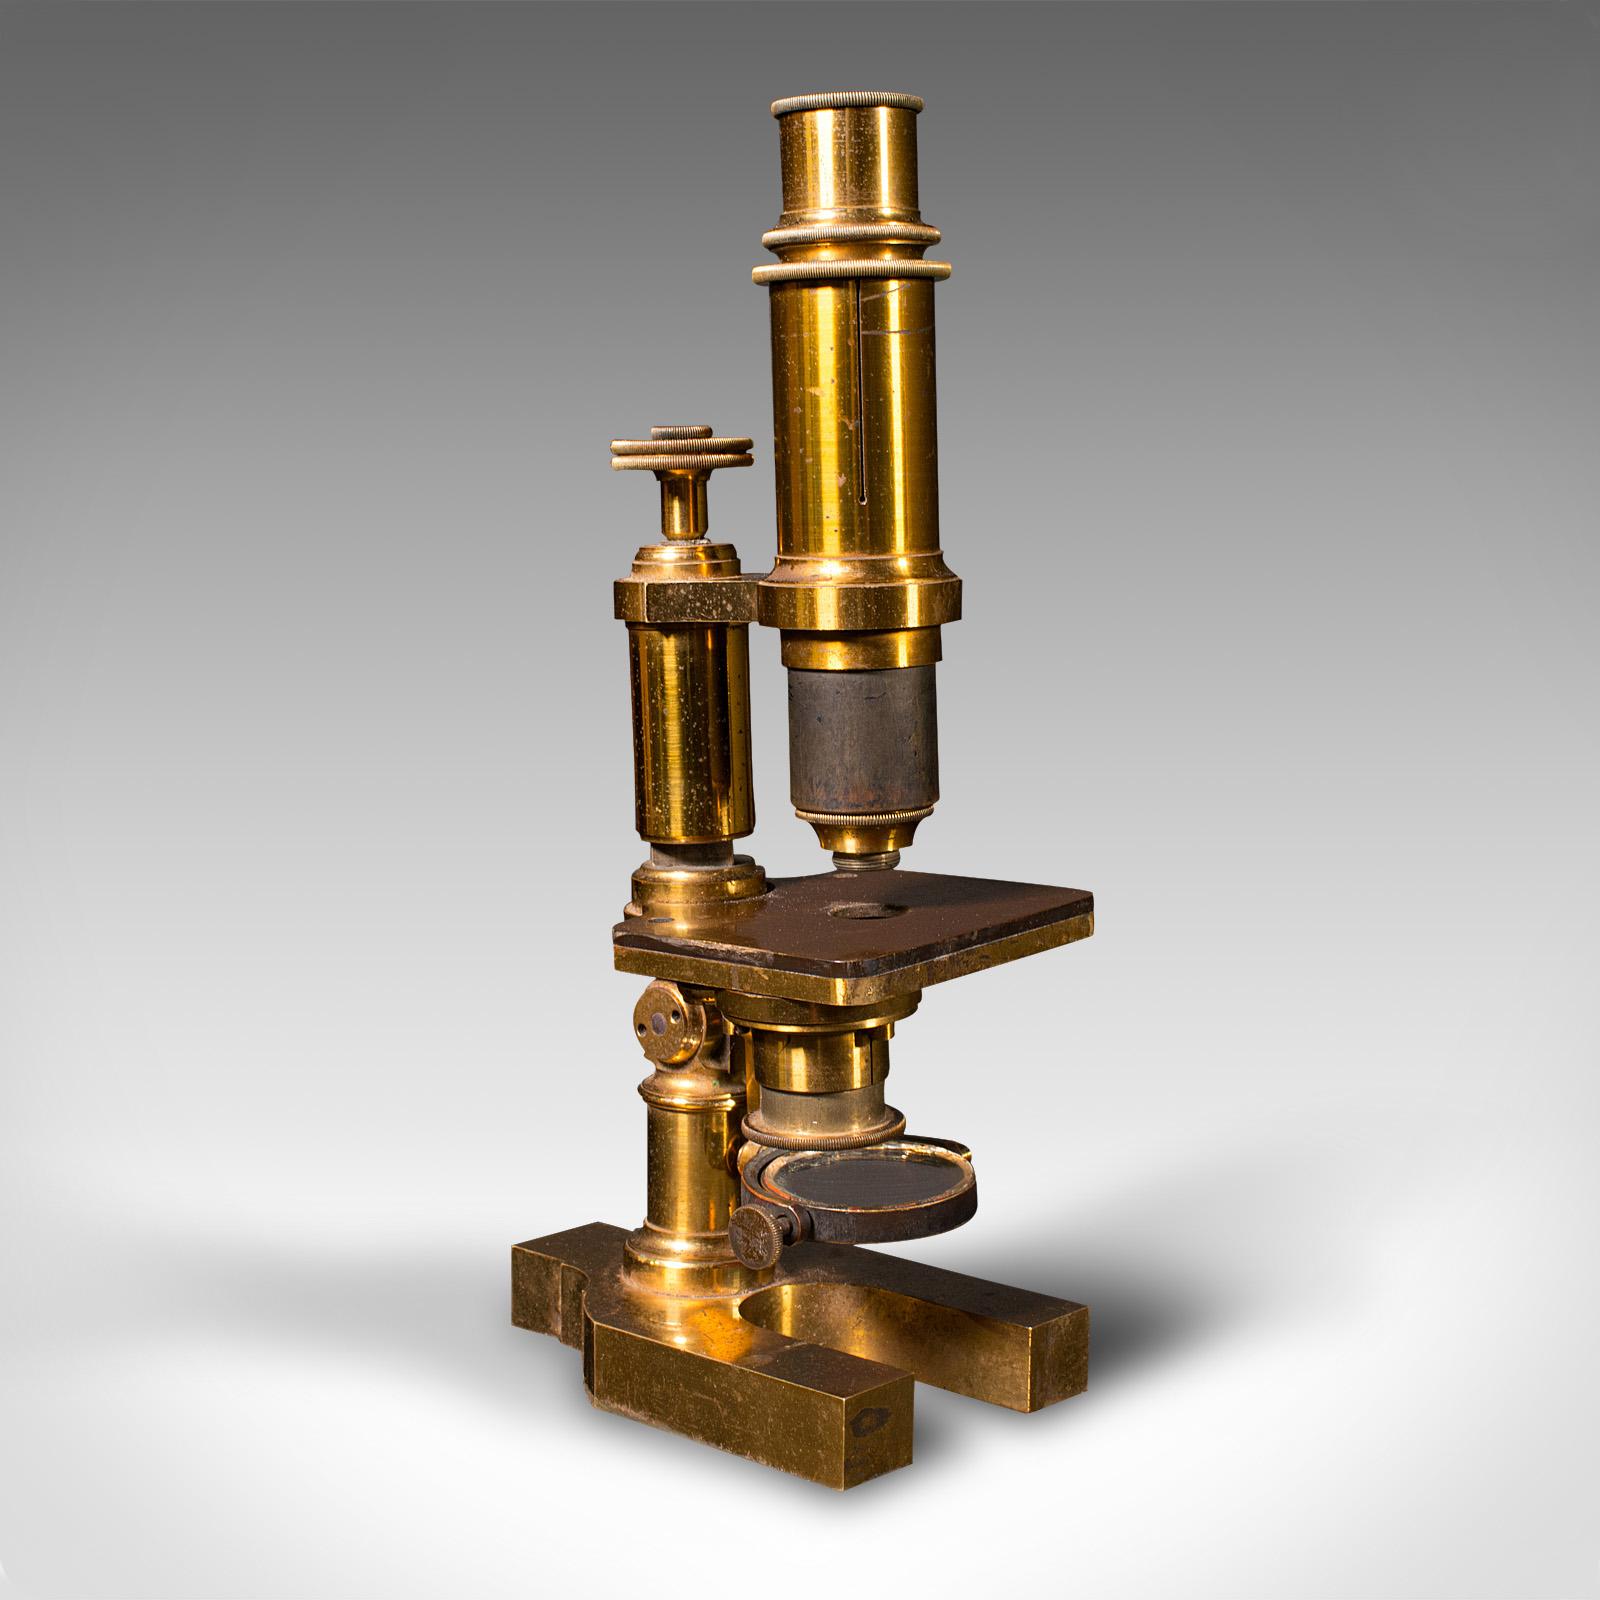 This is an antique cased monocular microscope. An English brass scientific instrument, dating to the late Victorian period, circa 1900.

Neatly presented and stored microscope, ideal for display
Displaying a desirable aged patina and in good